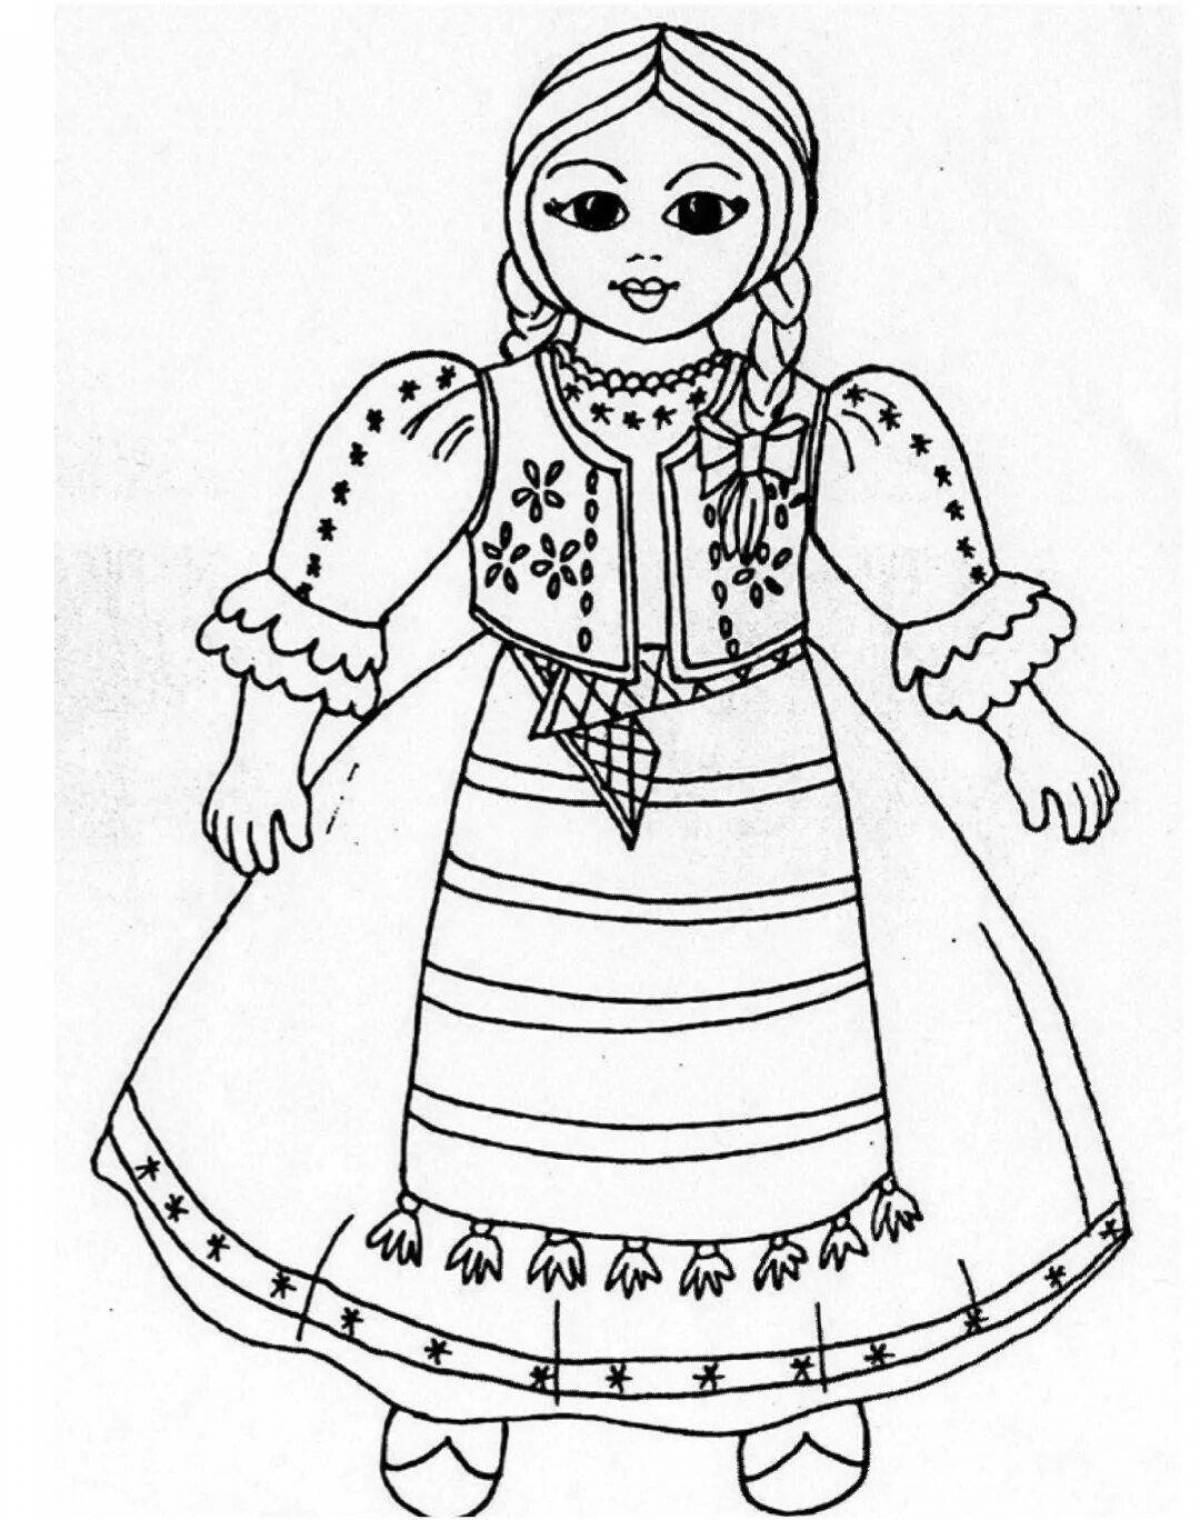 Coloring page decorated belarusian costume